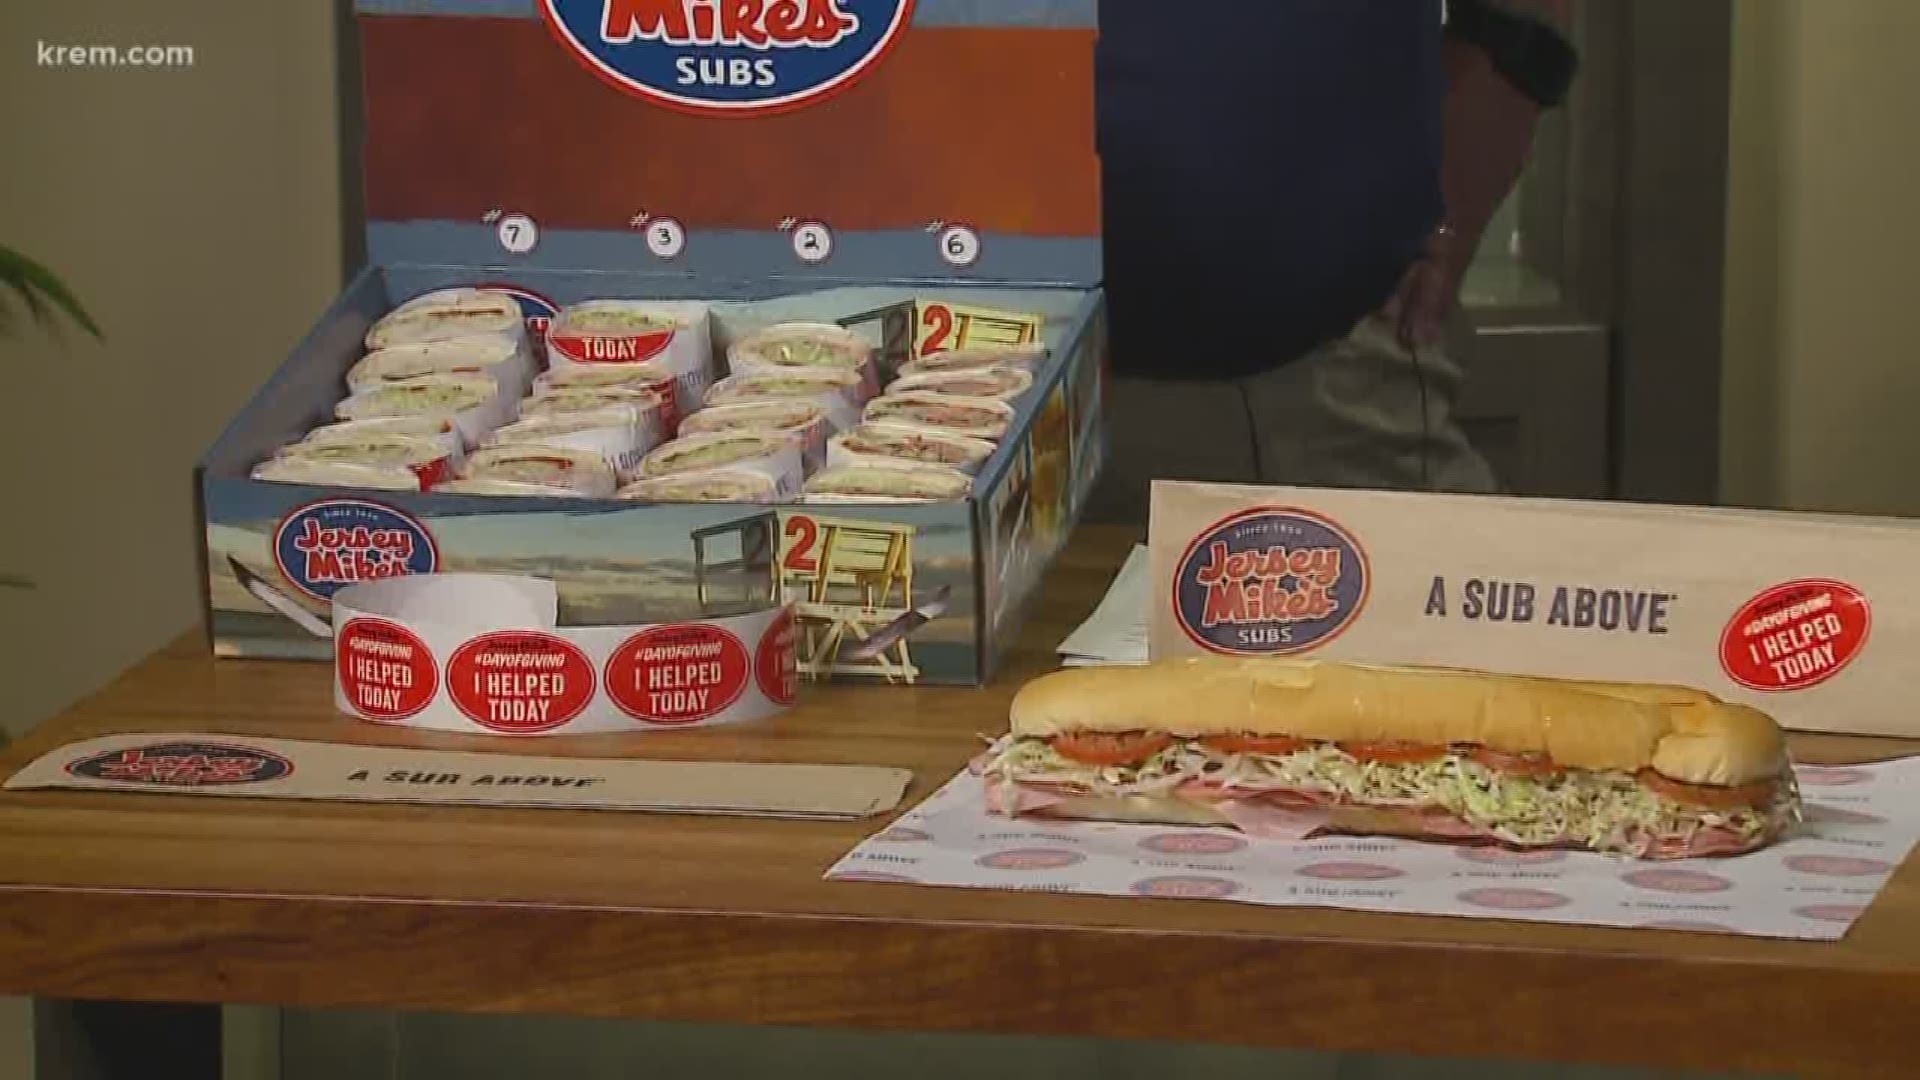 Jersey Mike's to donate 100% of sales Wednesday to local charities (3-28-18)